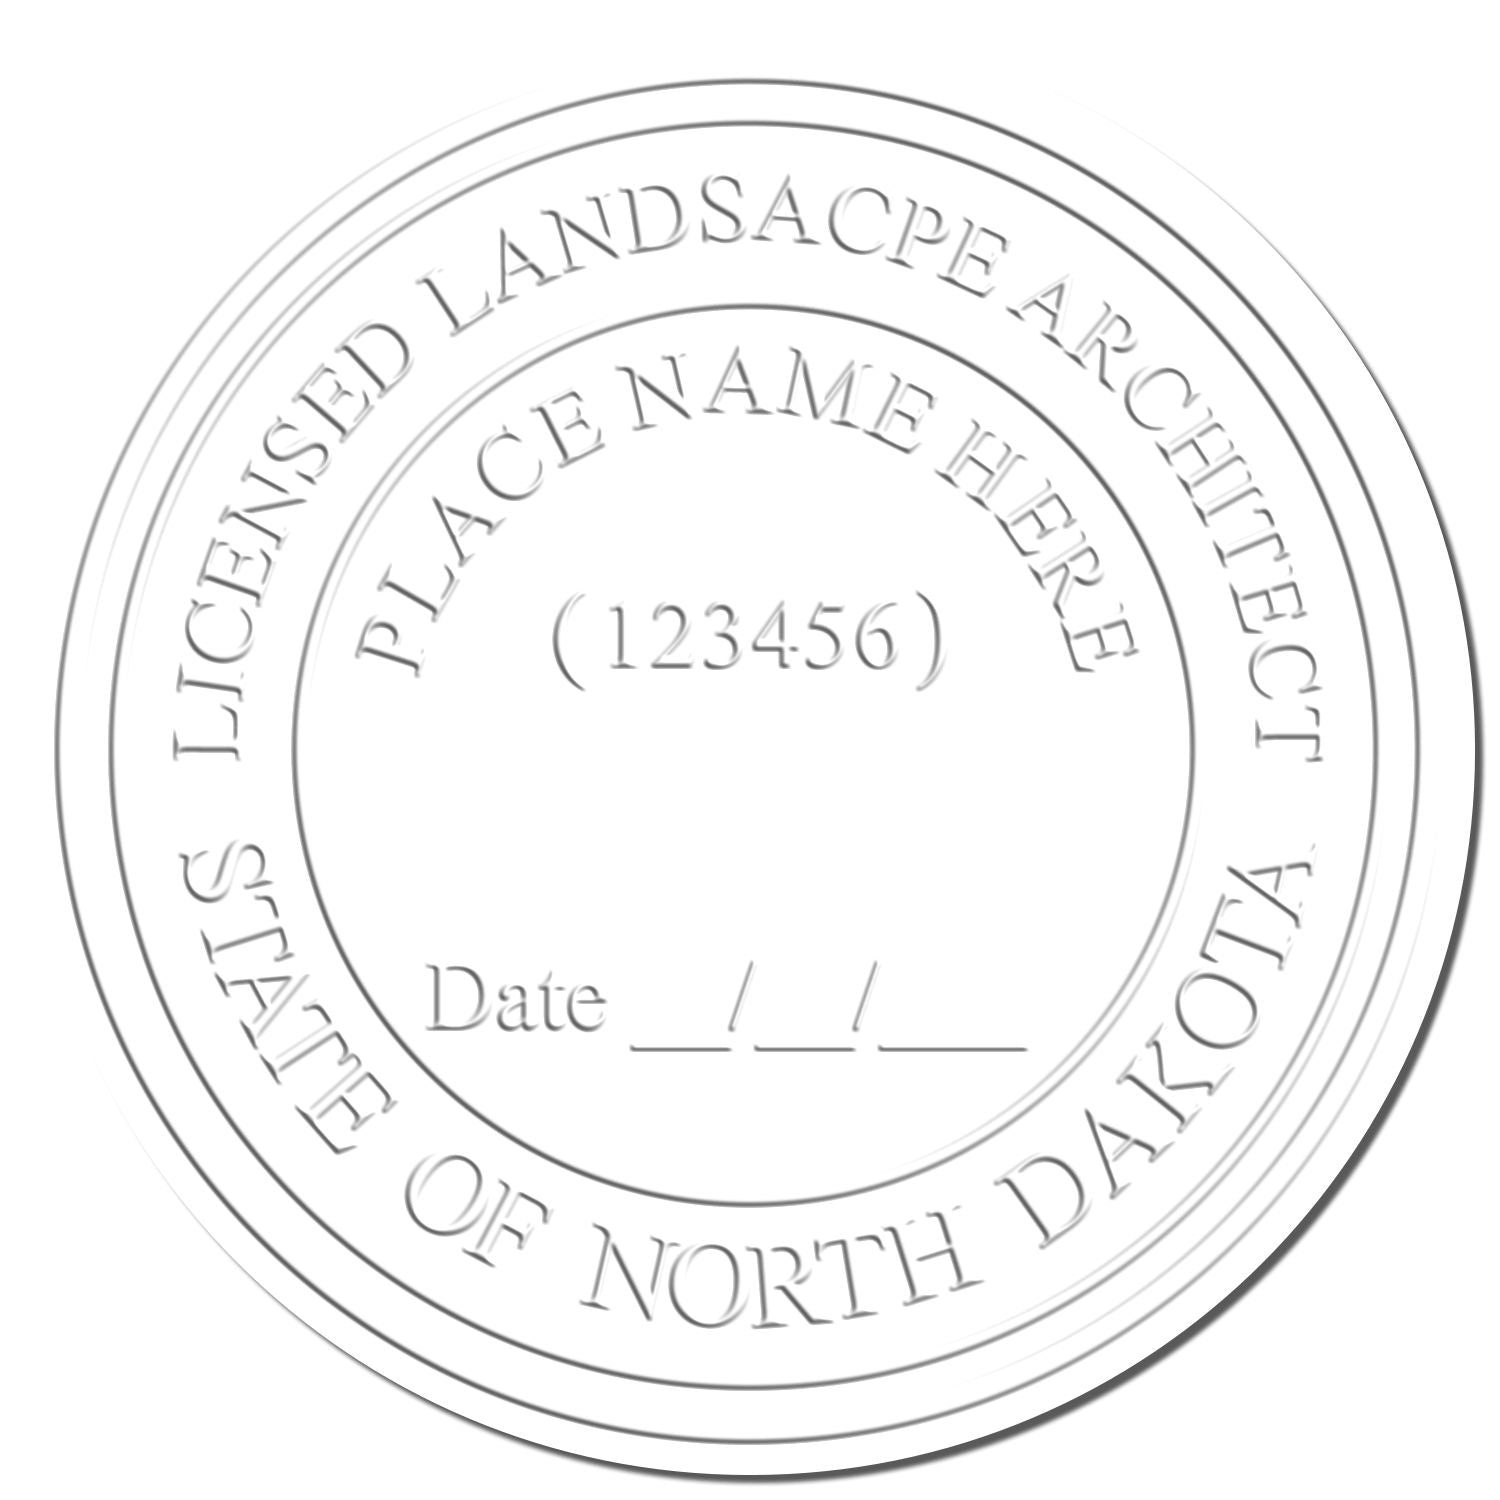 This paper is stamped with a sample imprint of the Gift North Dakota Landscape Architect Seal, signifying its quality and reliability.